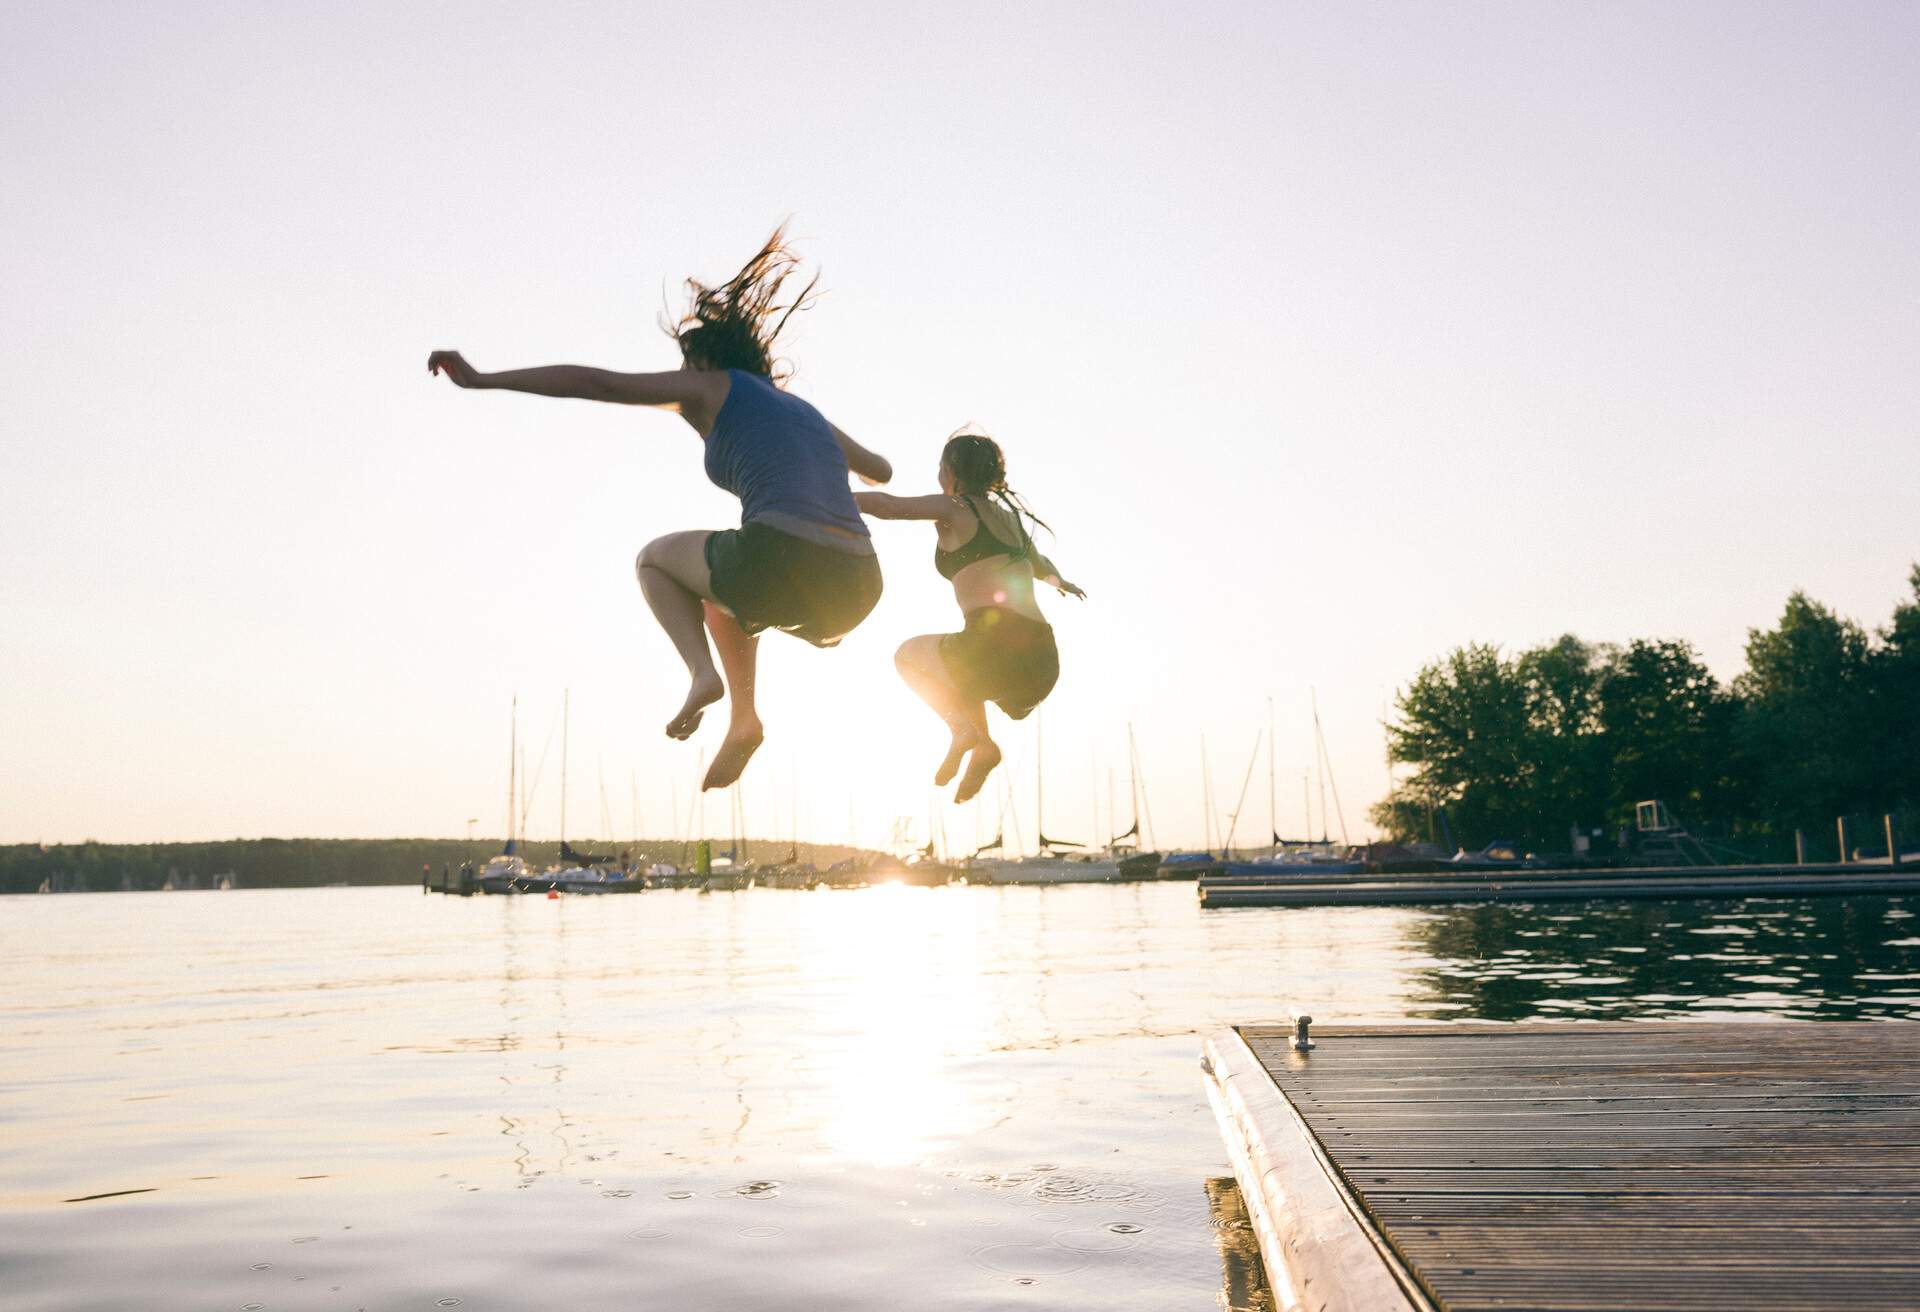 Two people leap into the air above a lake in a harbour.